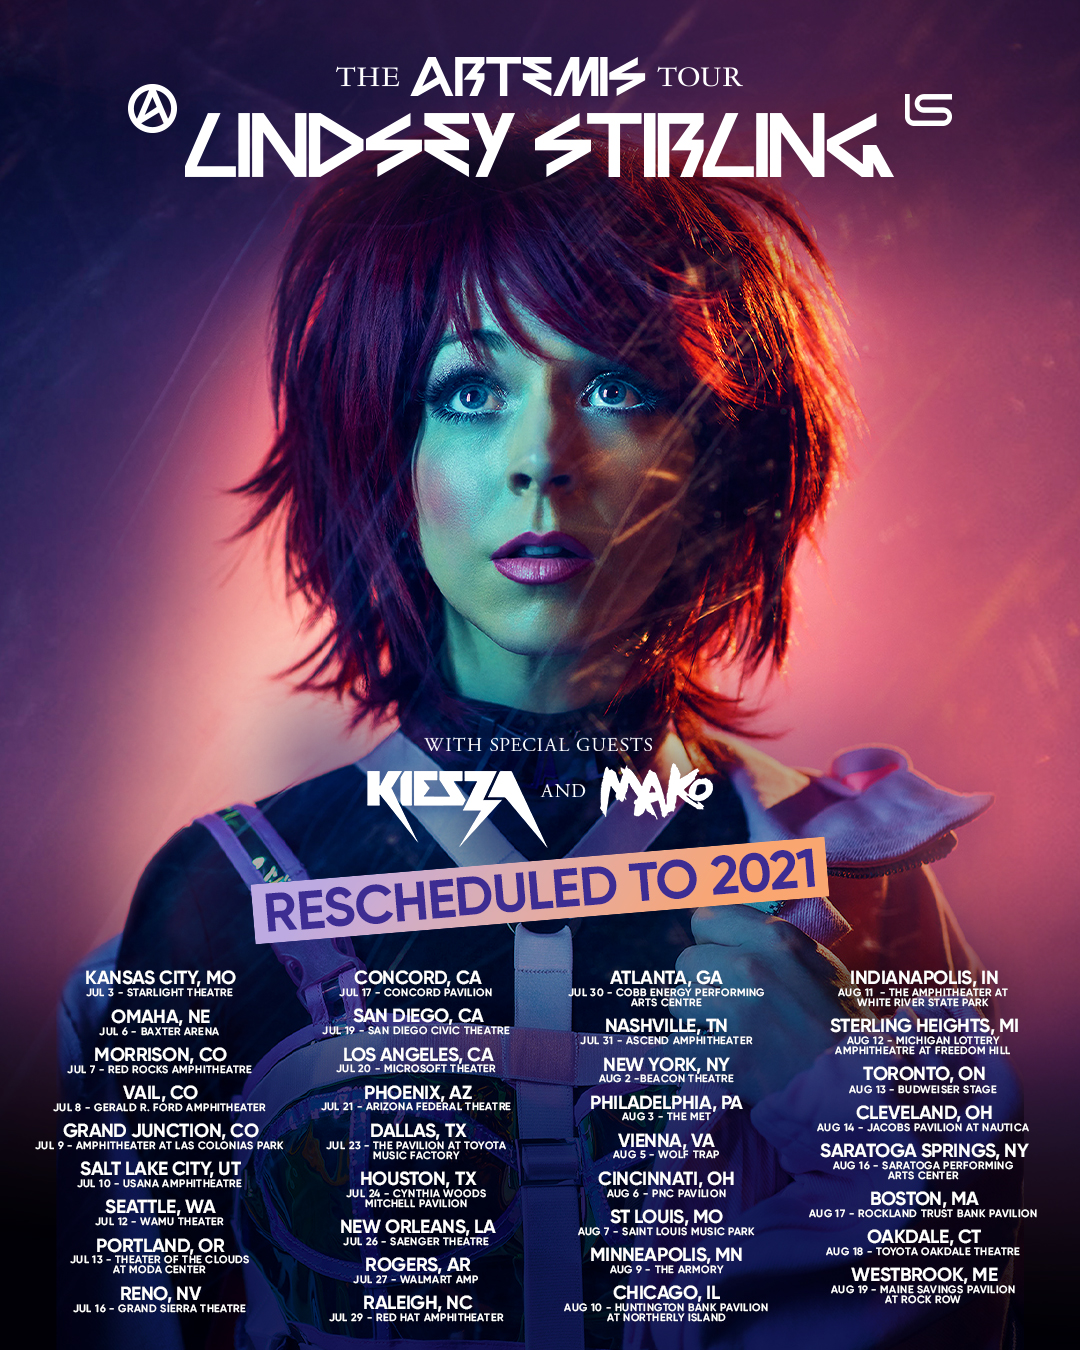 Poster: The Artemis Tour Lindsey Stirling RESCHEDULED TO 2021